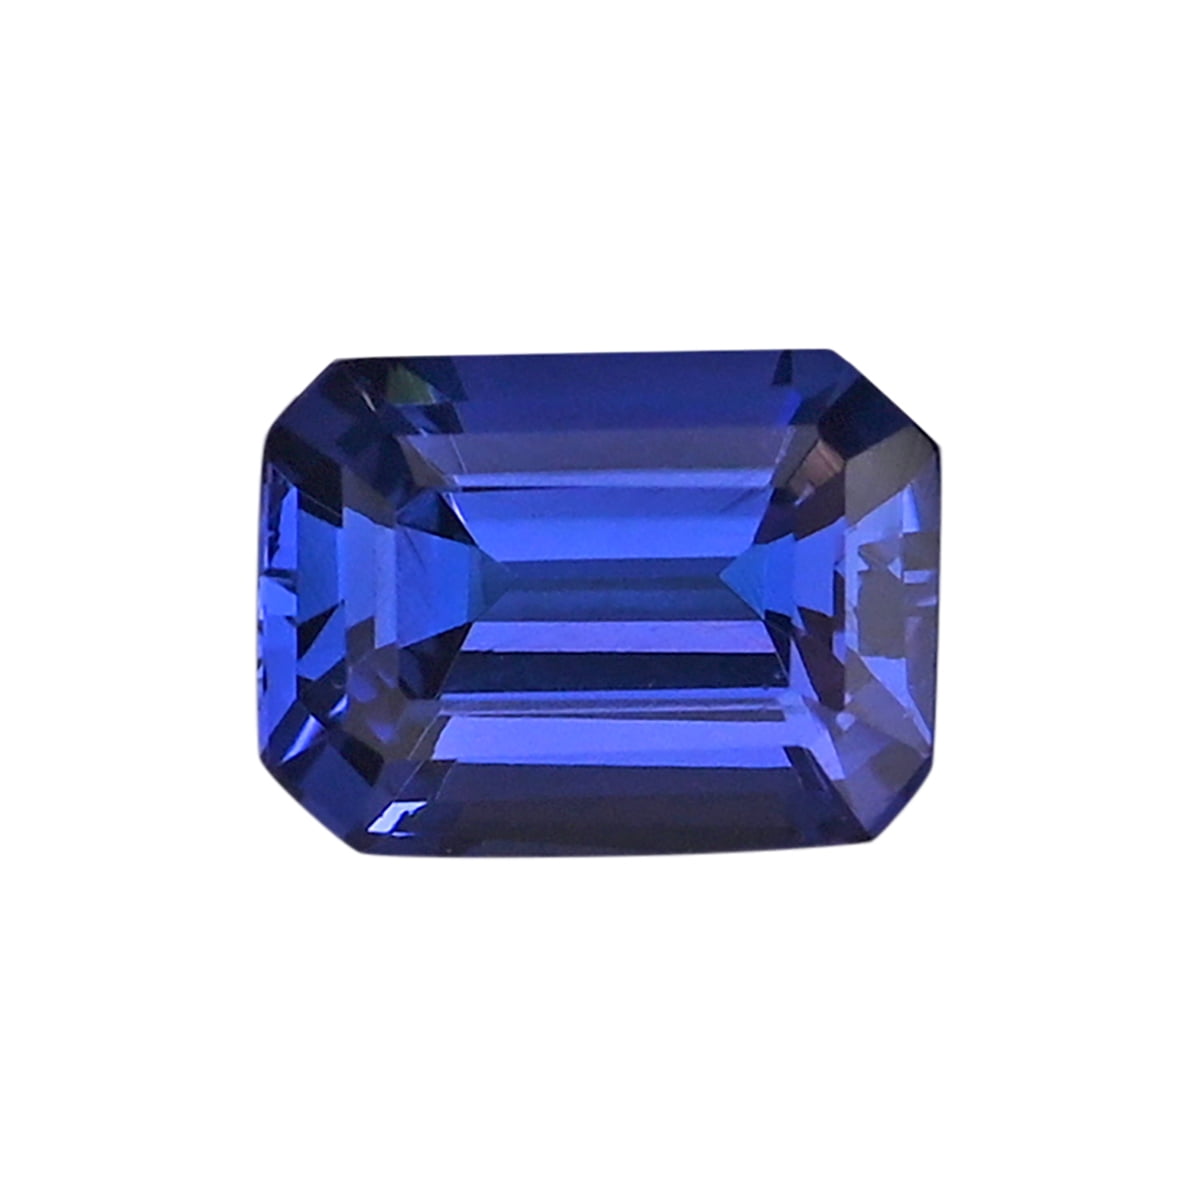 Details about  / Halloween Sale 3.40 Ct//11 mm Blue Tanzanite Natural Oval Gemstone Certified SS36